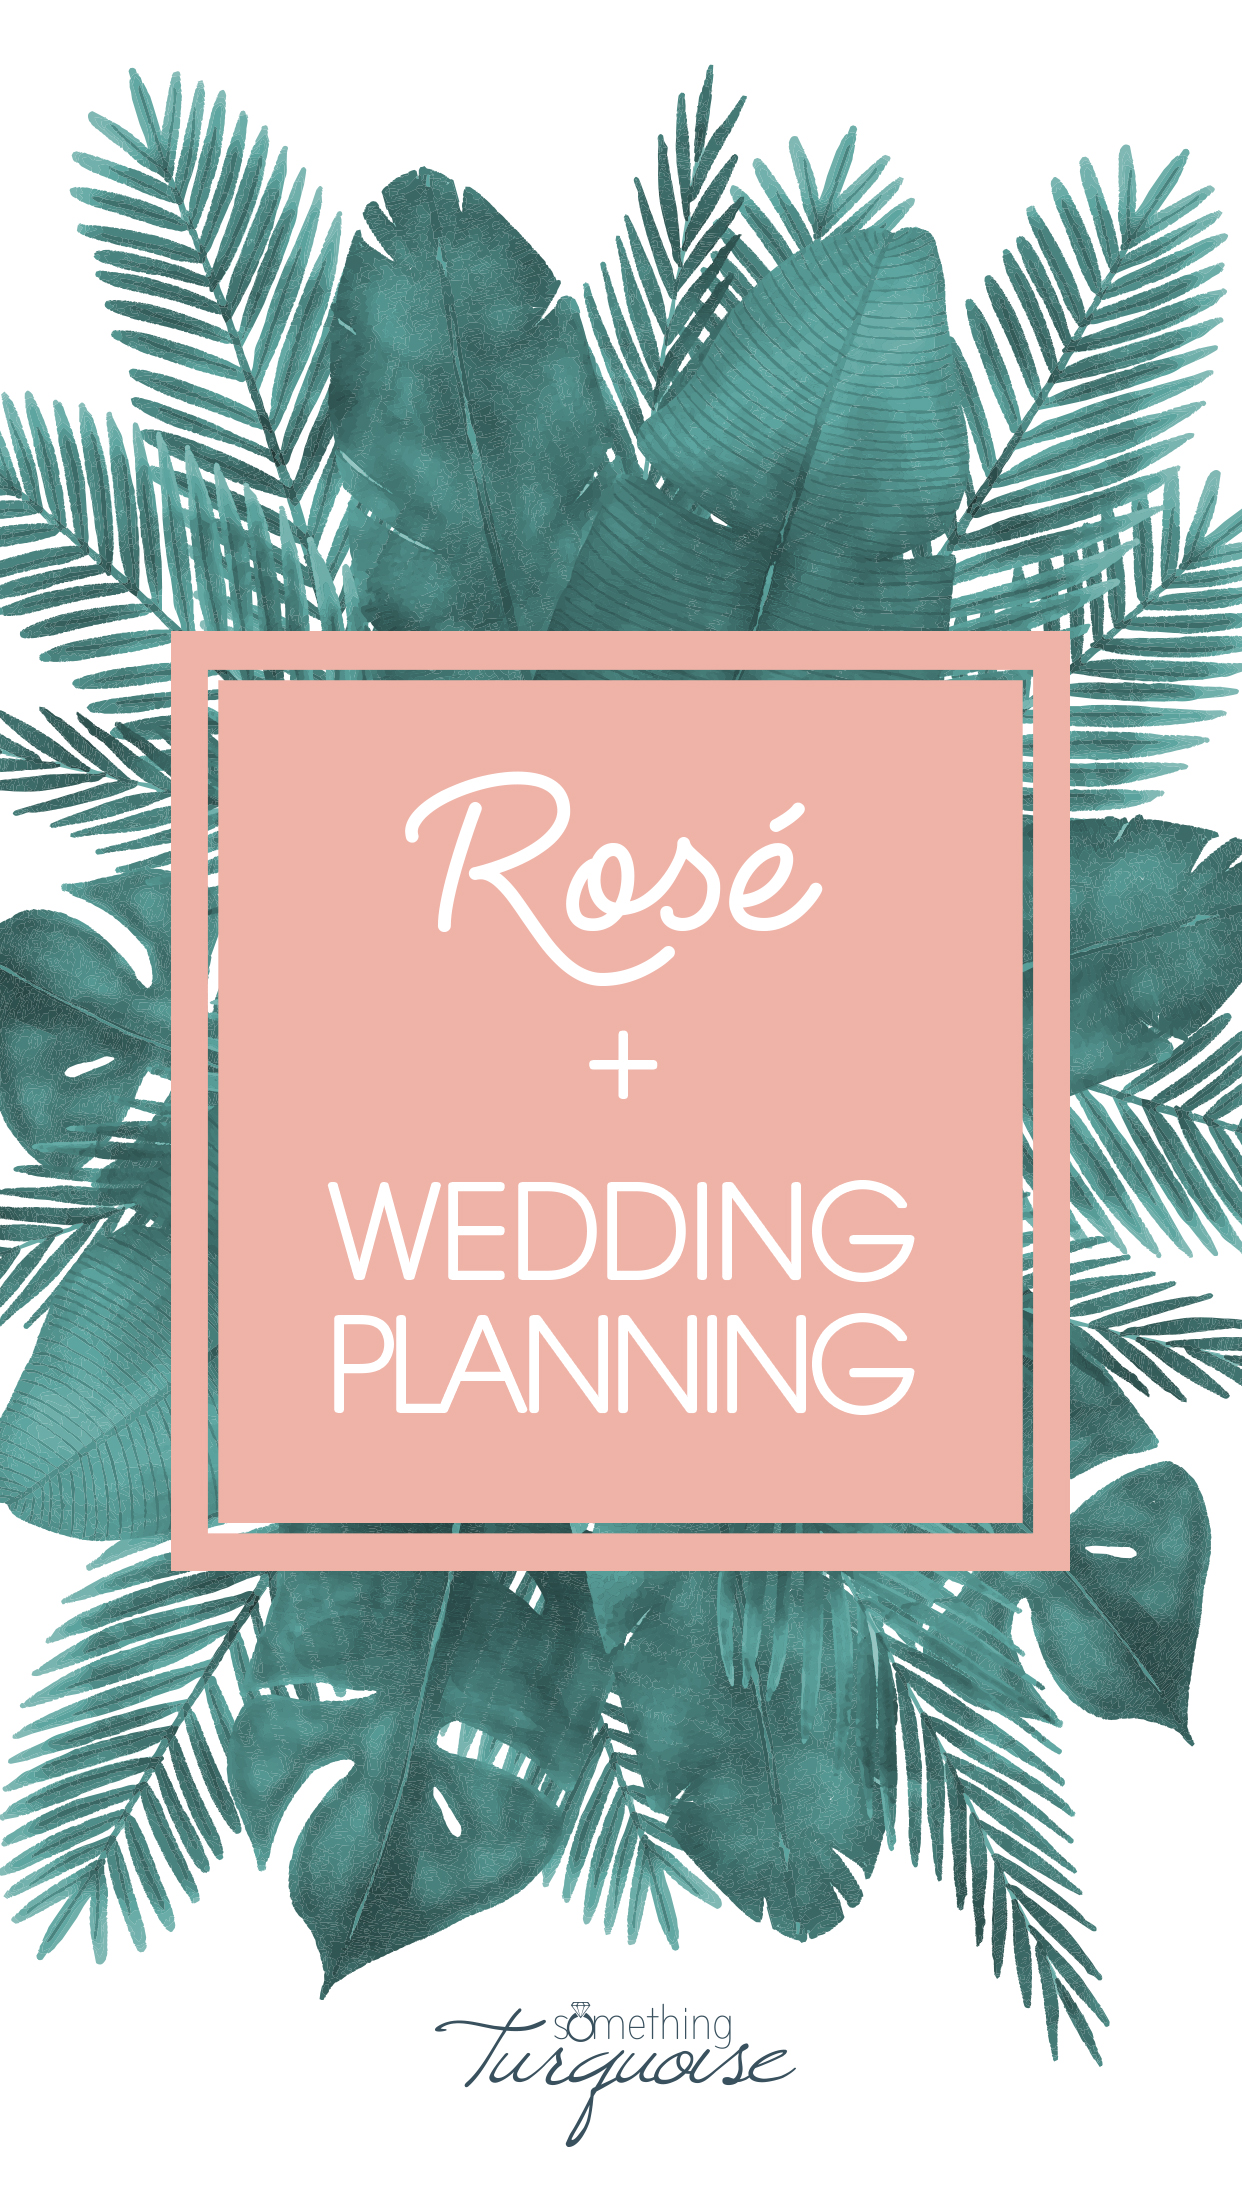 FREE wedding planning wallpapers for your smart phone!